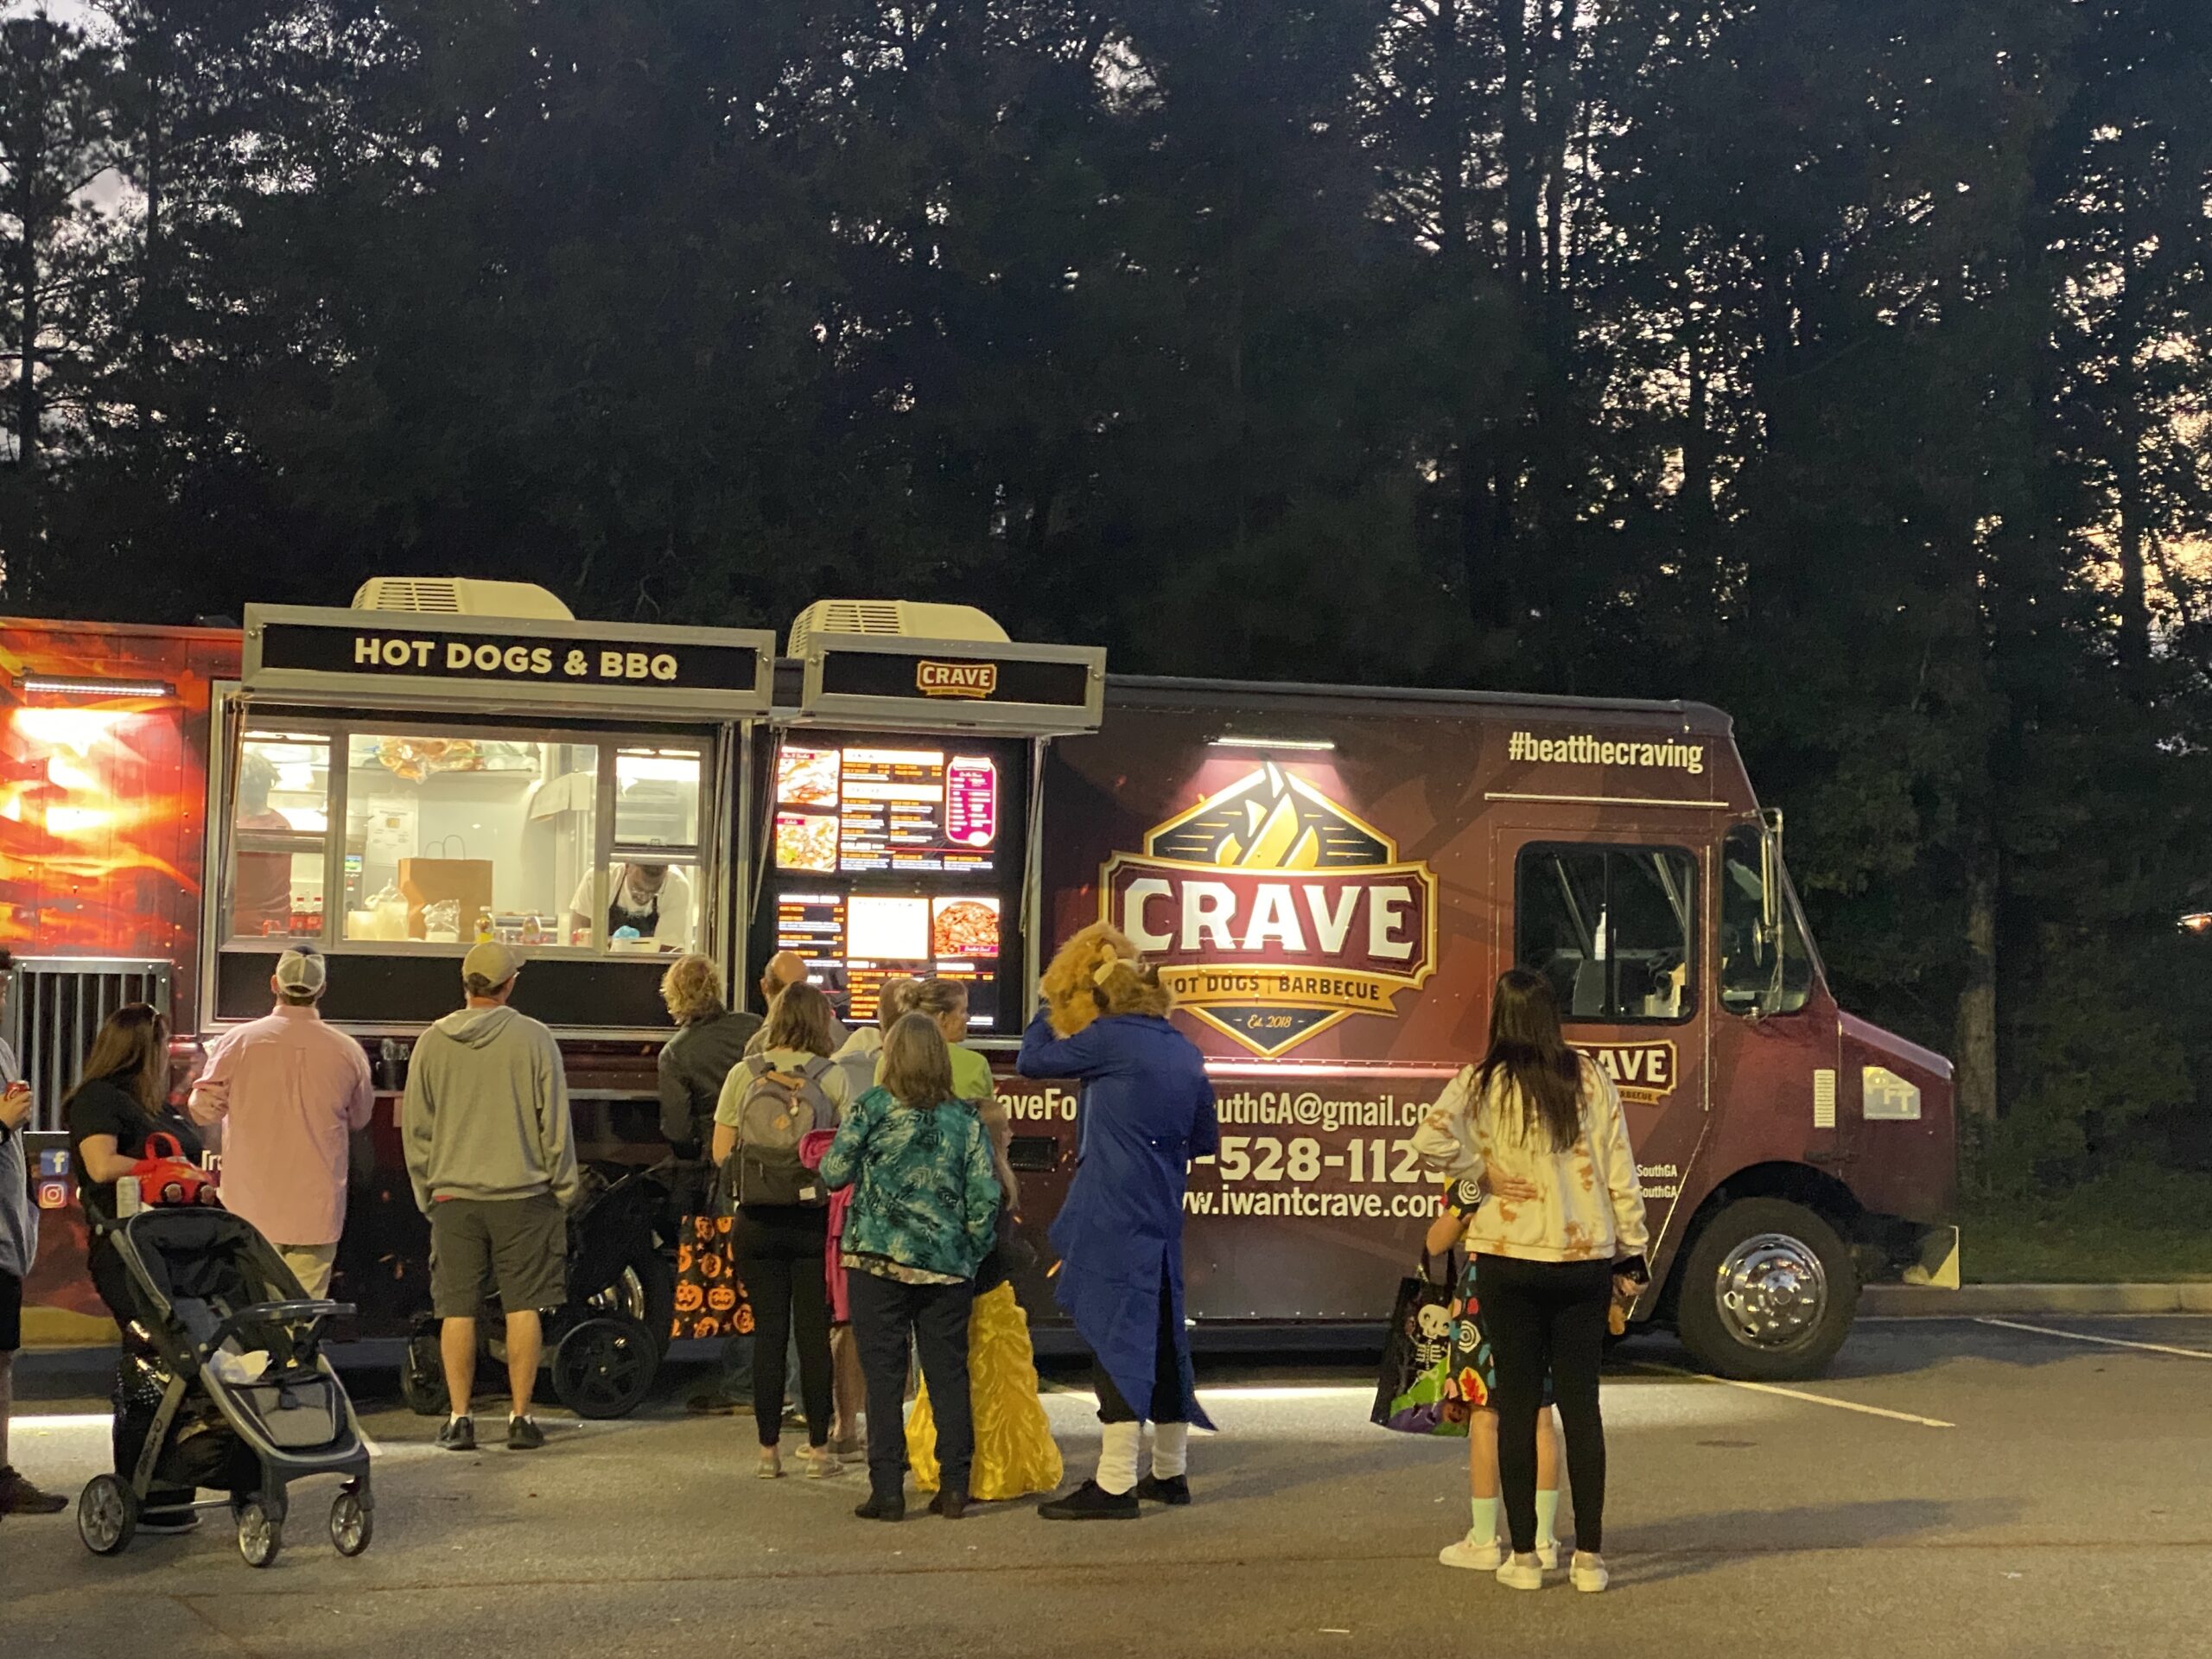 Crave Hot Dogs & BBQ Rolls into Sumter SC with Mouthwatering Flavors